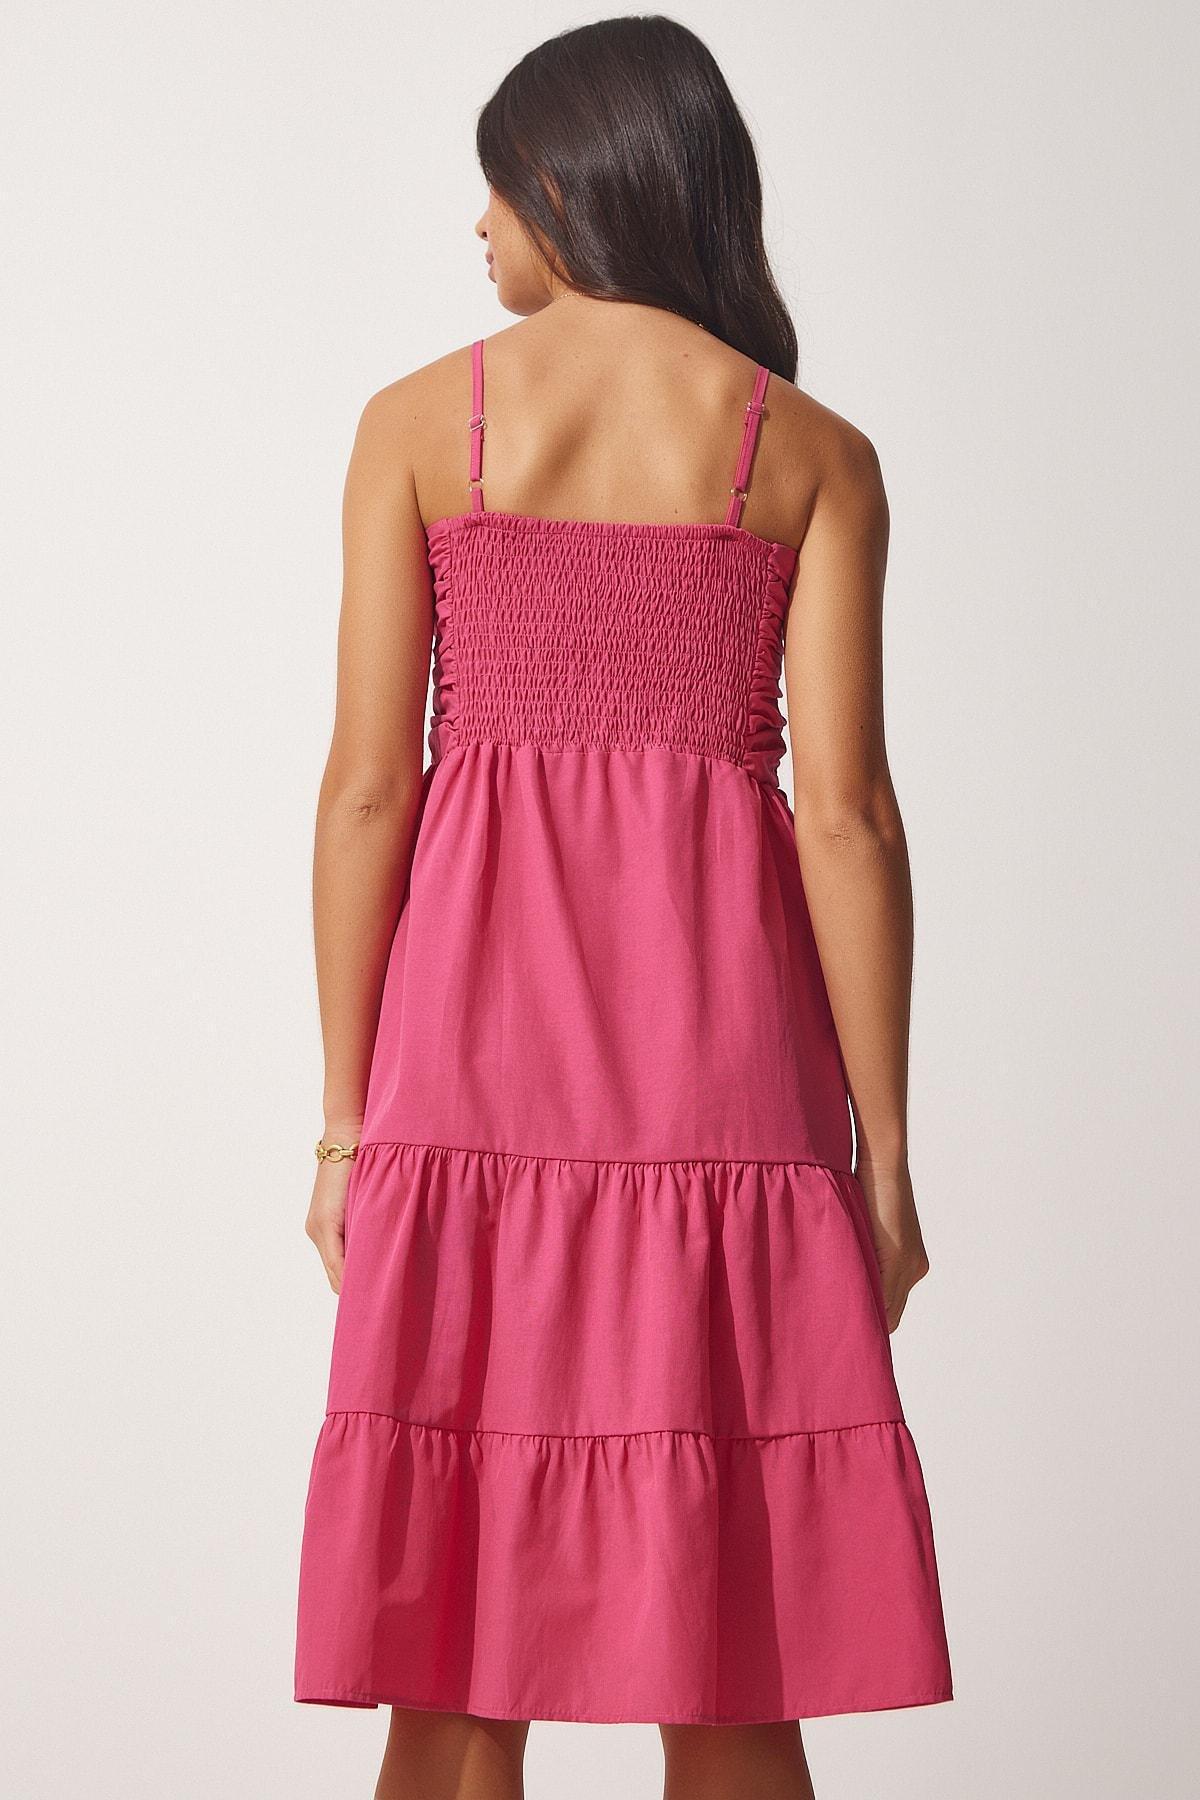 Happiness Istanbul - Pink A-Line Dress